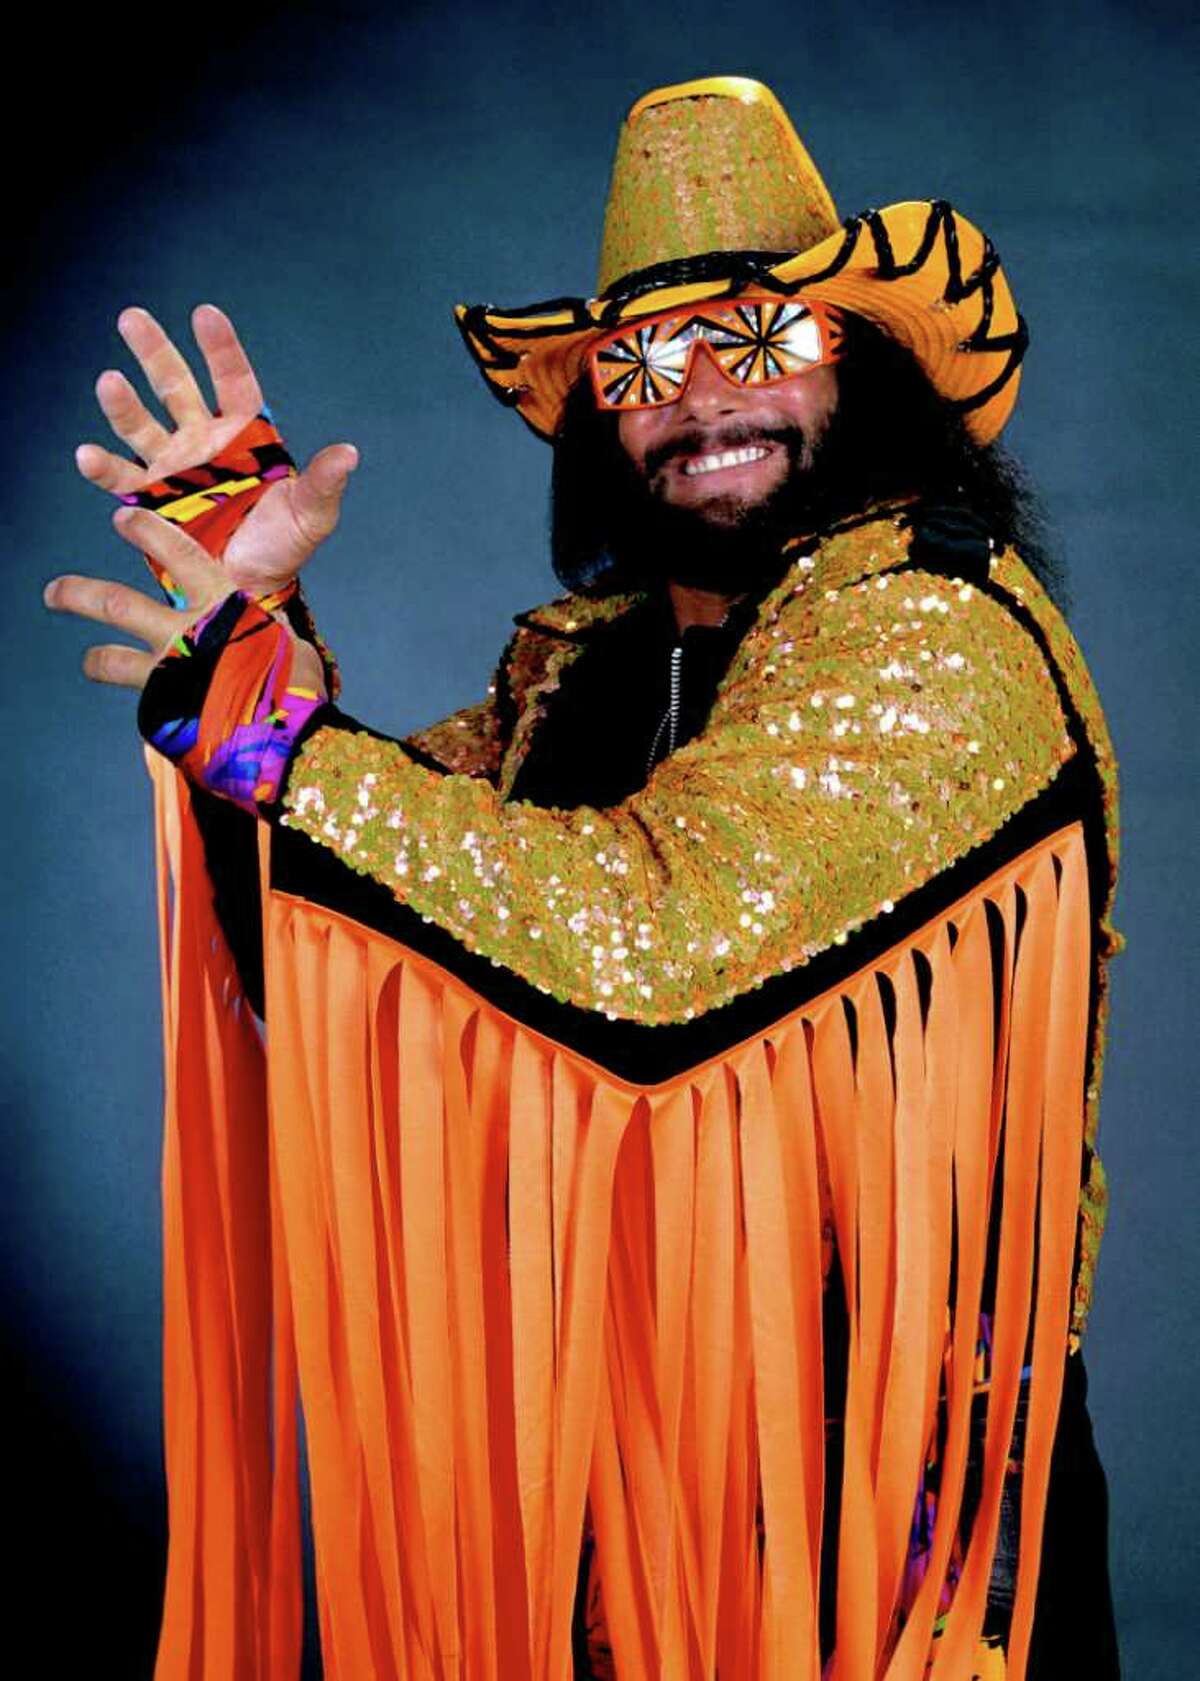 In this undated publicity image released by WWE, professional wrestler Randy "Macho Man" Savage is shown. Savage, whose legal name is Randy Mario Poffo, died in a car crash in Florida on Friday, May 20, 2011, according to a Florida Highway Patrol crash report.